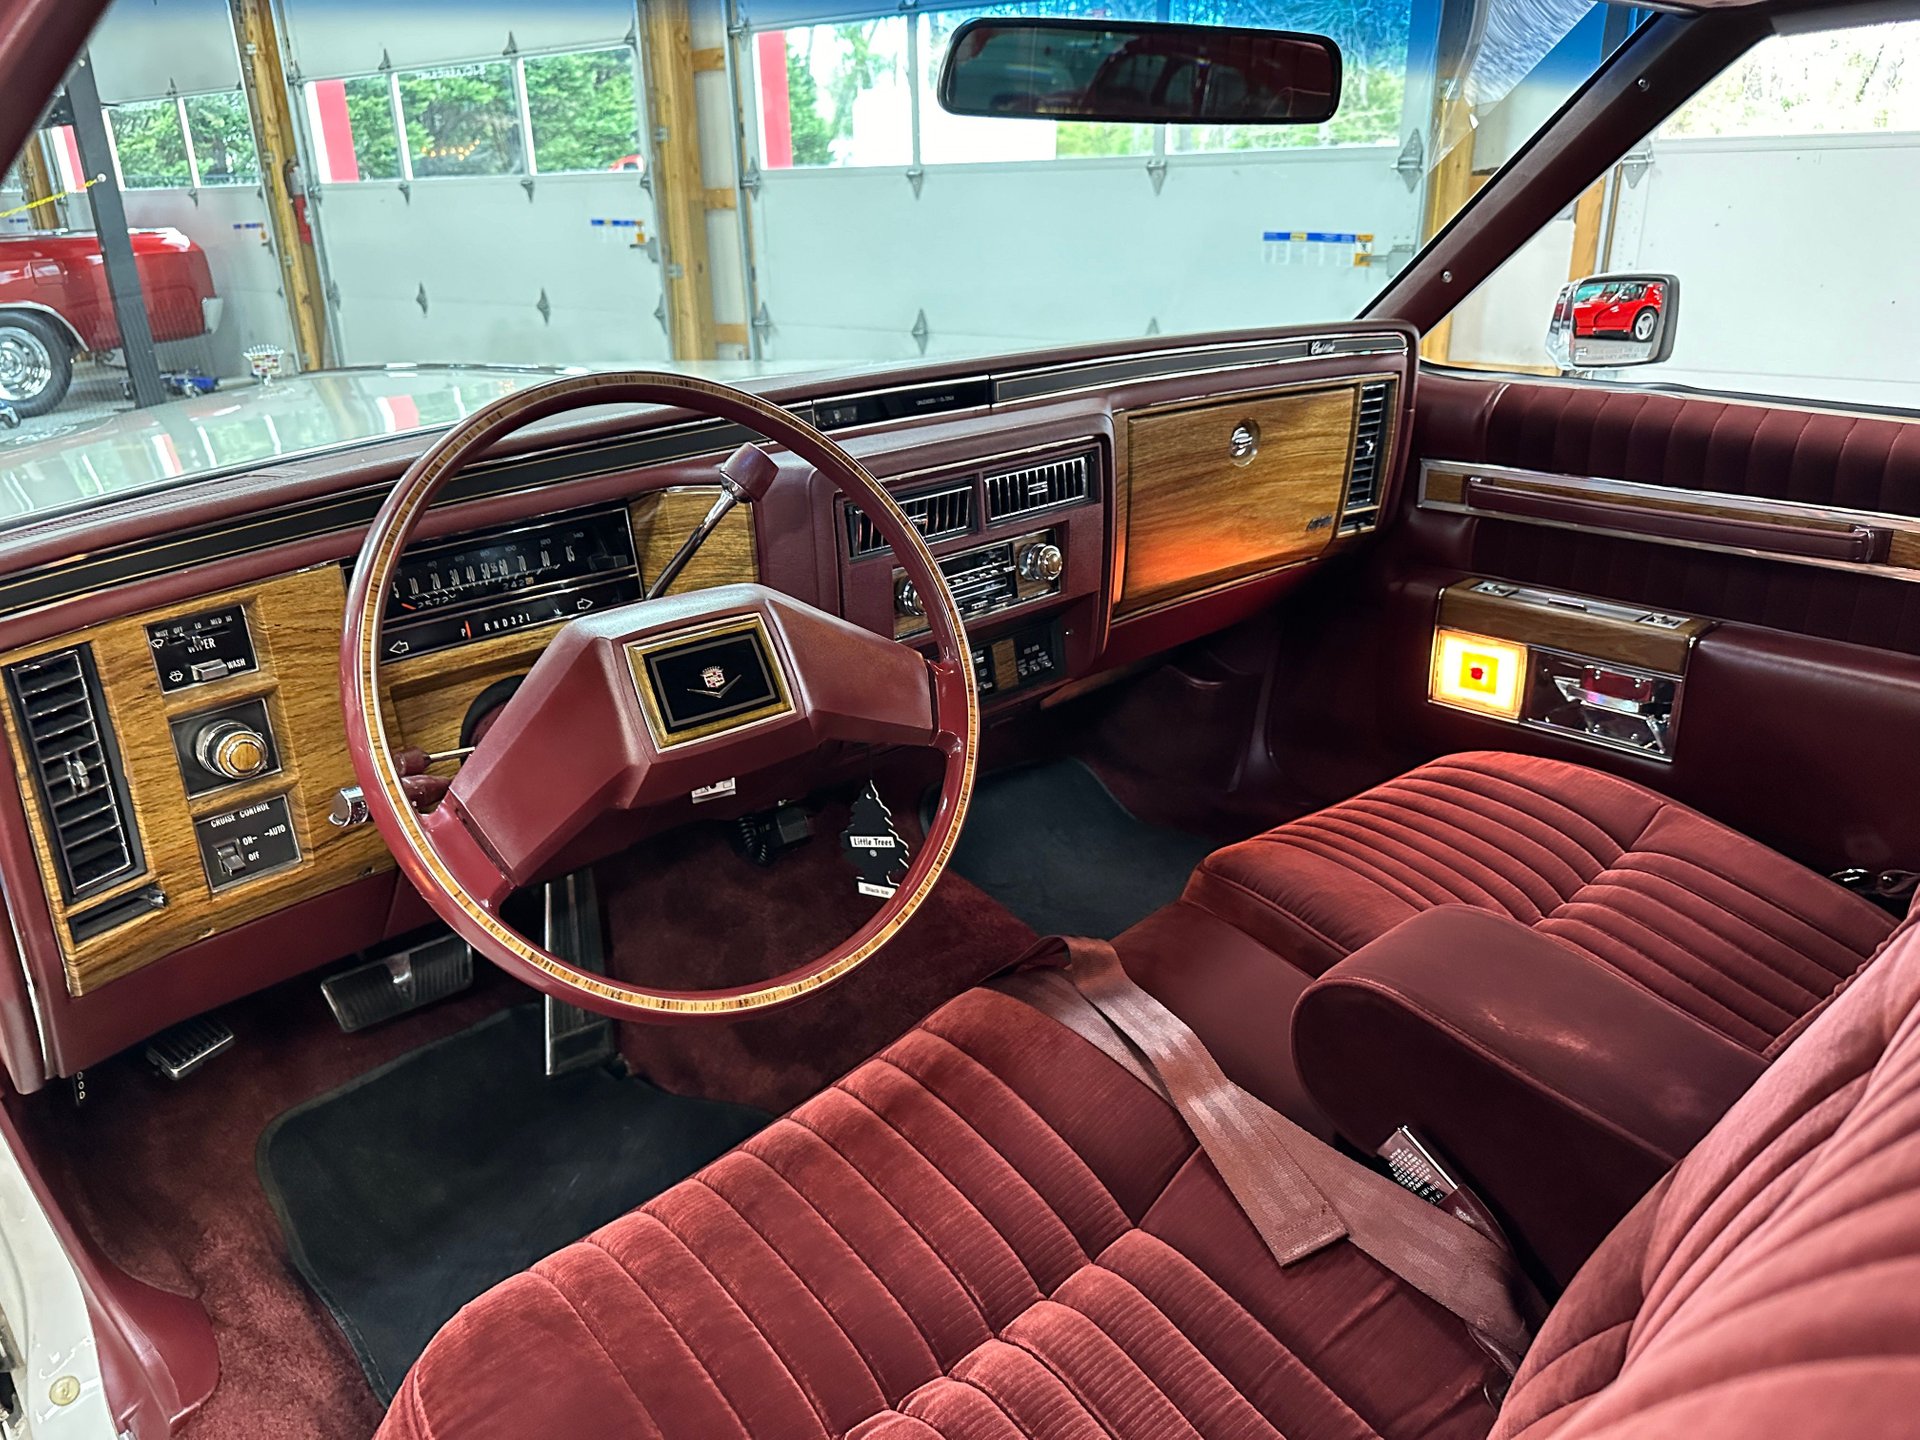 83-28544 | 1983 Cadillac Coupe DeVille | South Jersey Classics